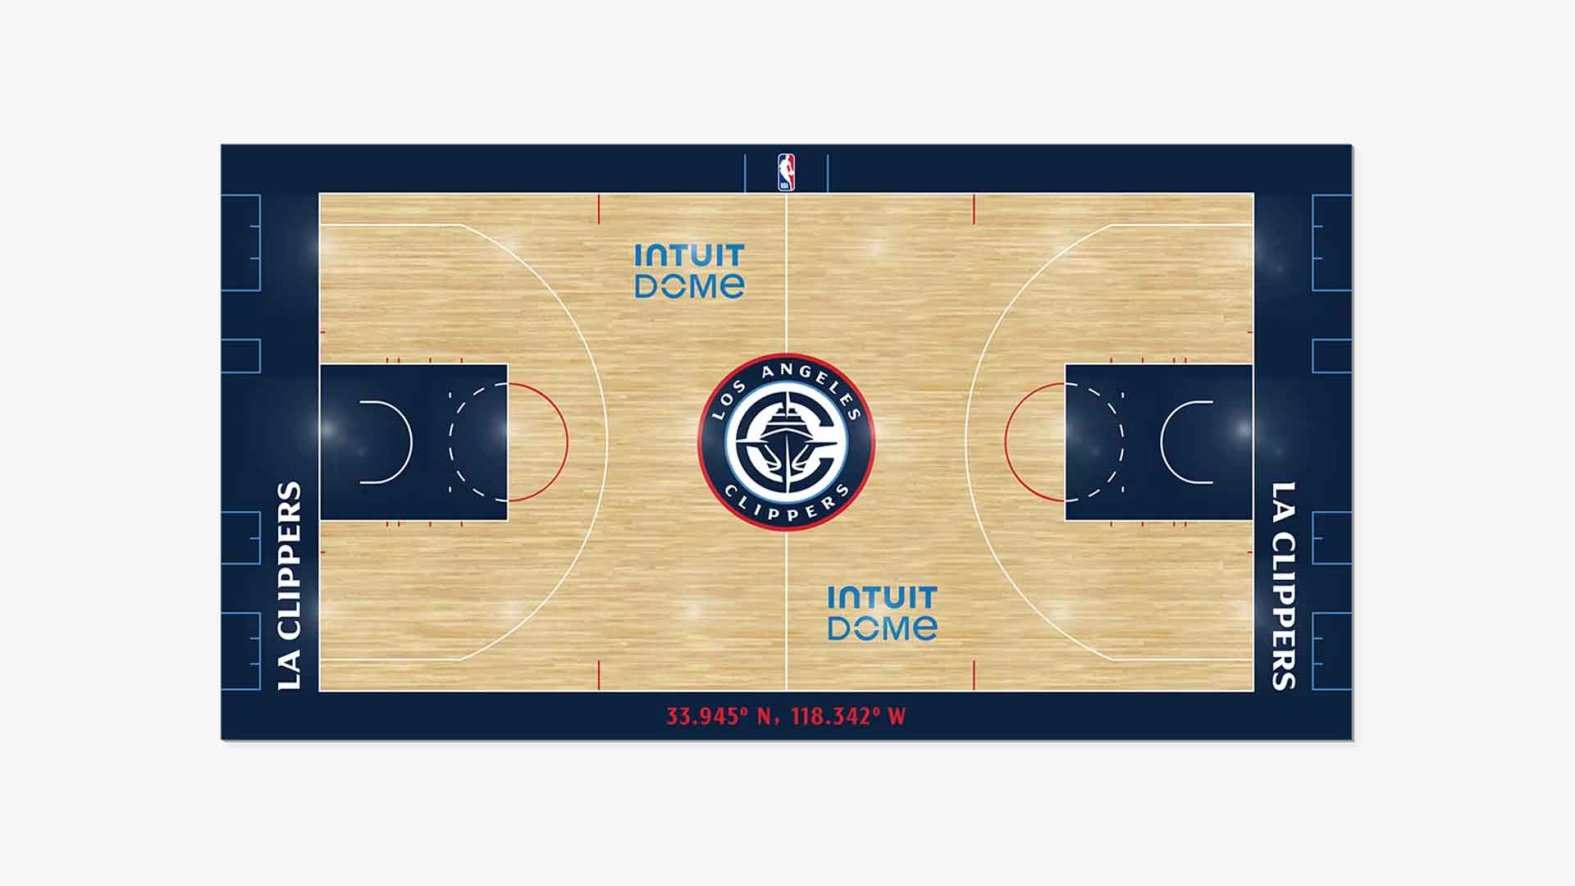 Web 240226 New Clippers Court 2 ?quality=85&strip=all&fit=1920%2C1080&w=1575&h=886&crop=1